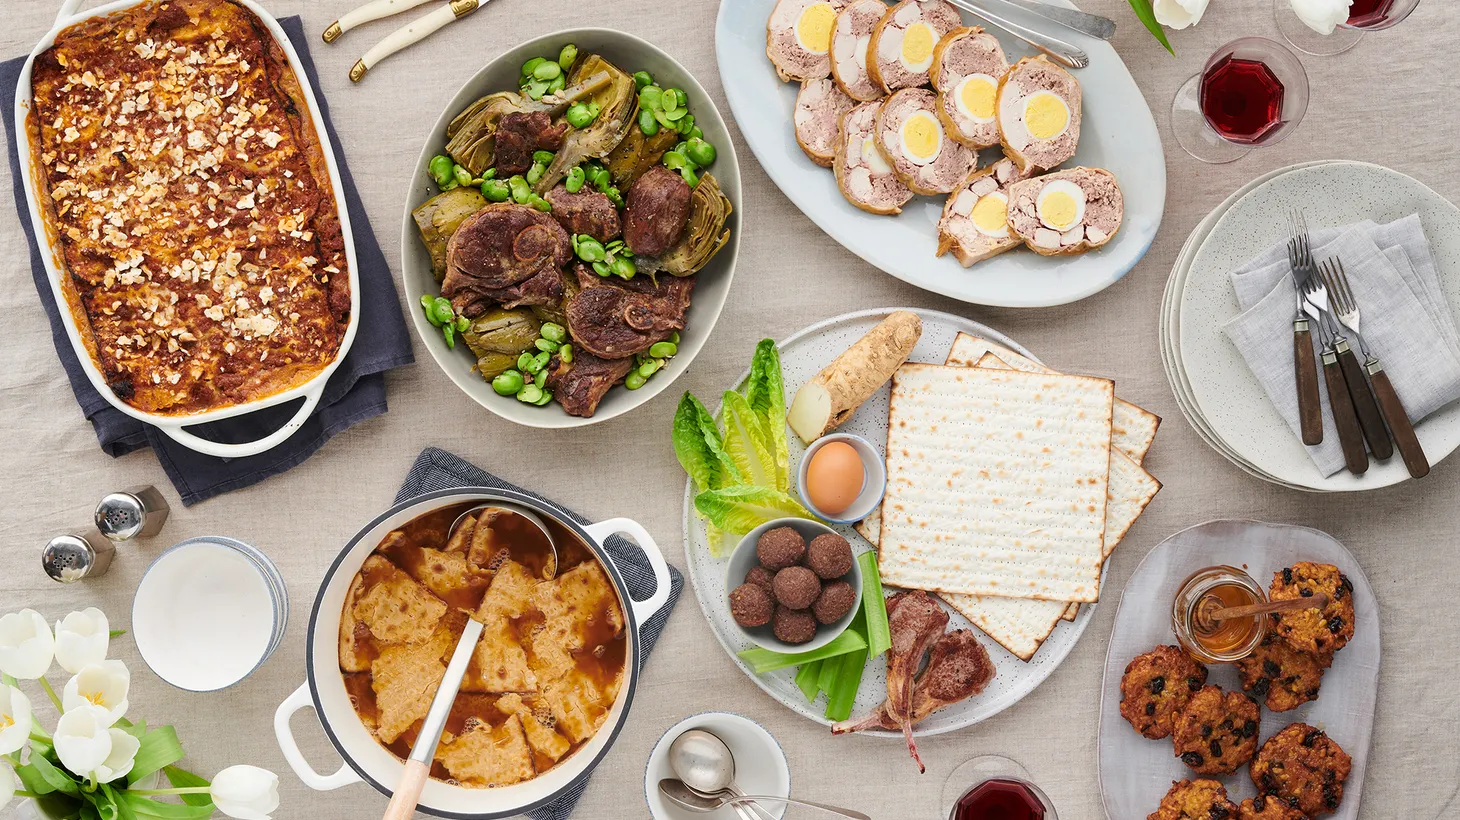 The Italian Jewish Passover spread can include dairy-free lasagna, lamb with artichokes and fava beans, stuffed turkey meatloaf, honey matzo fritters, and a Seder plate with charoset.